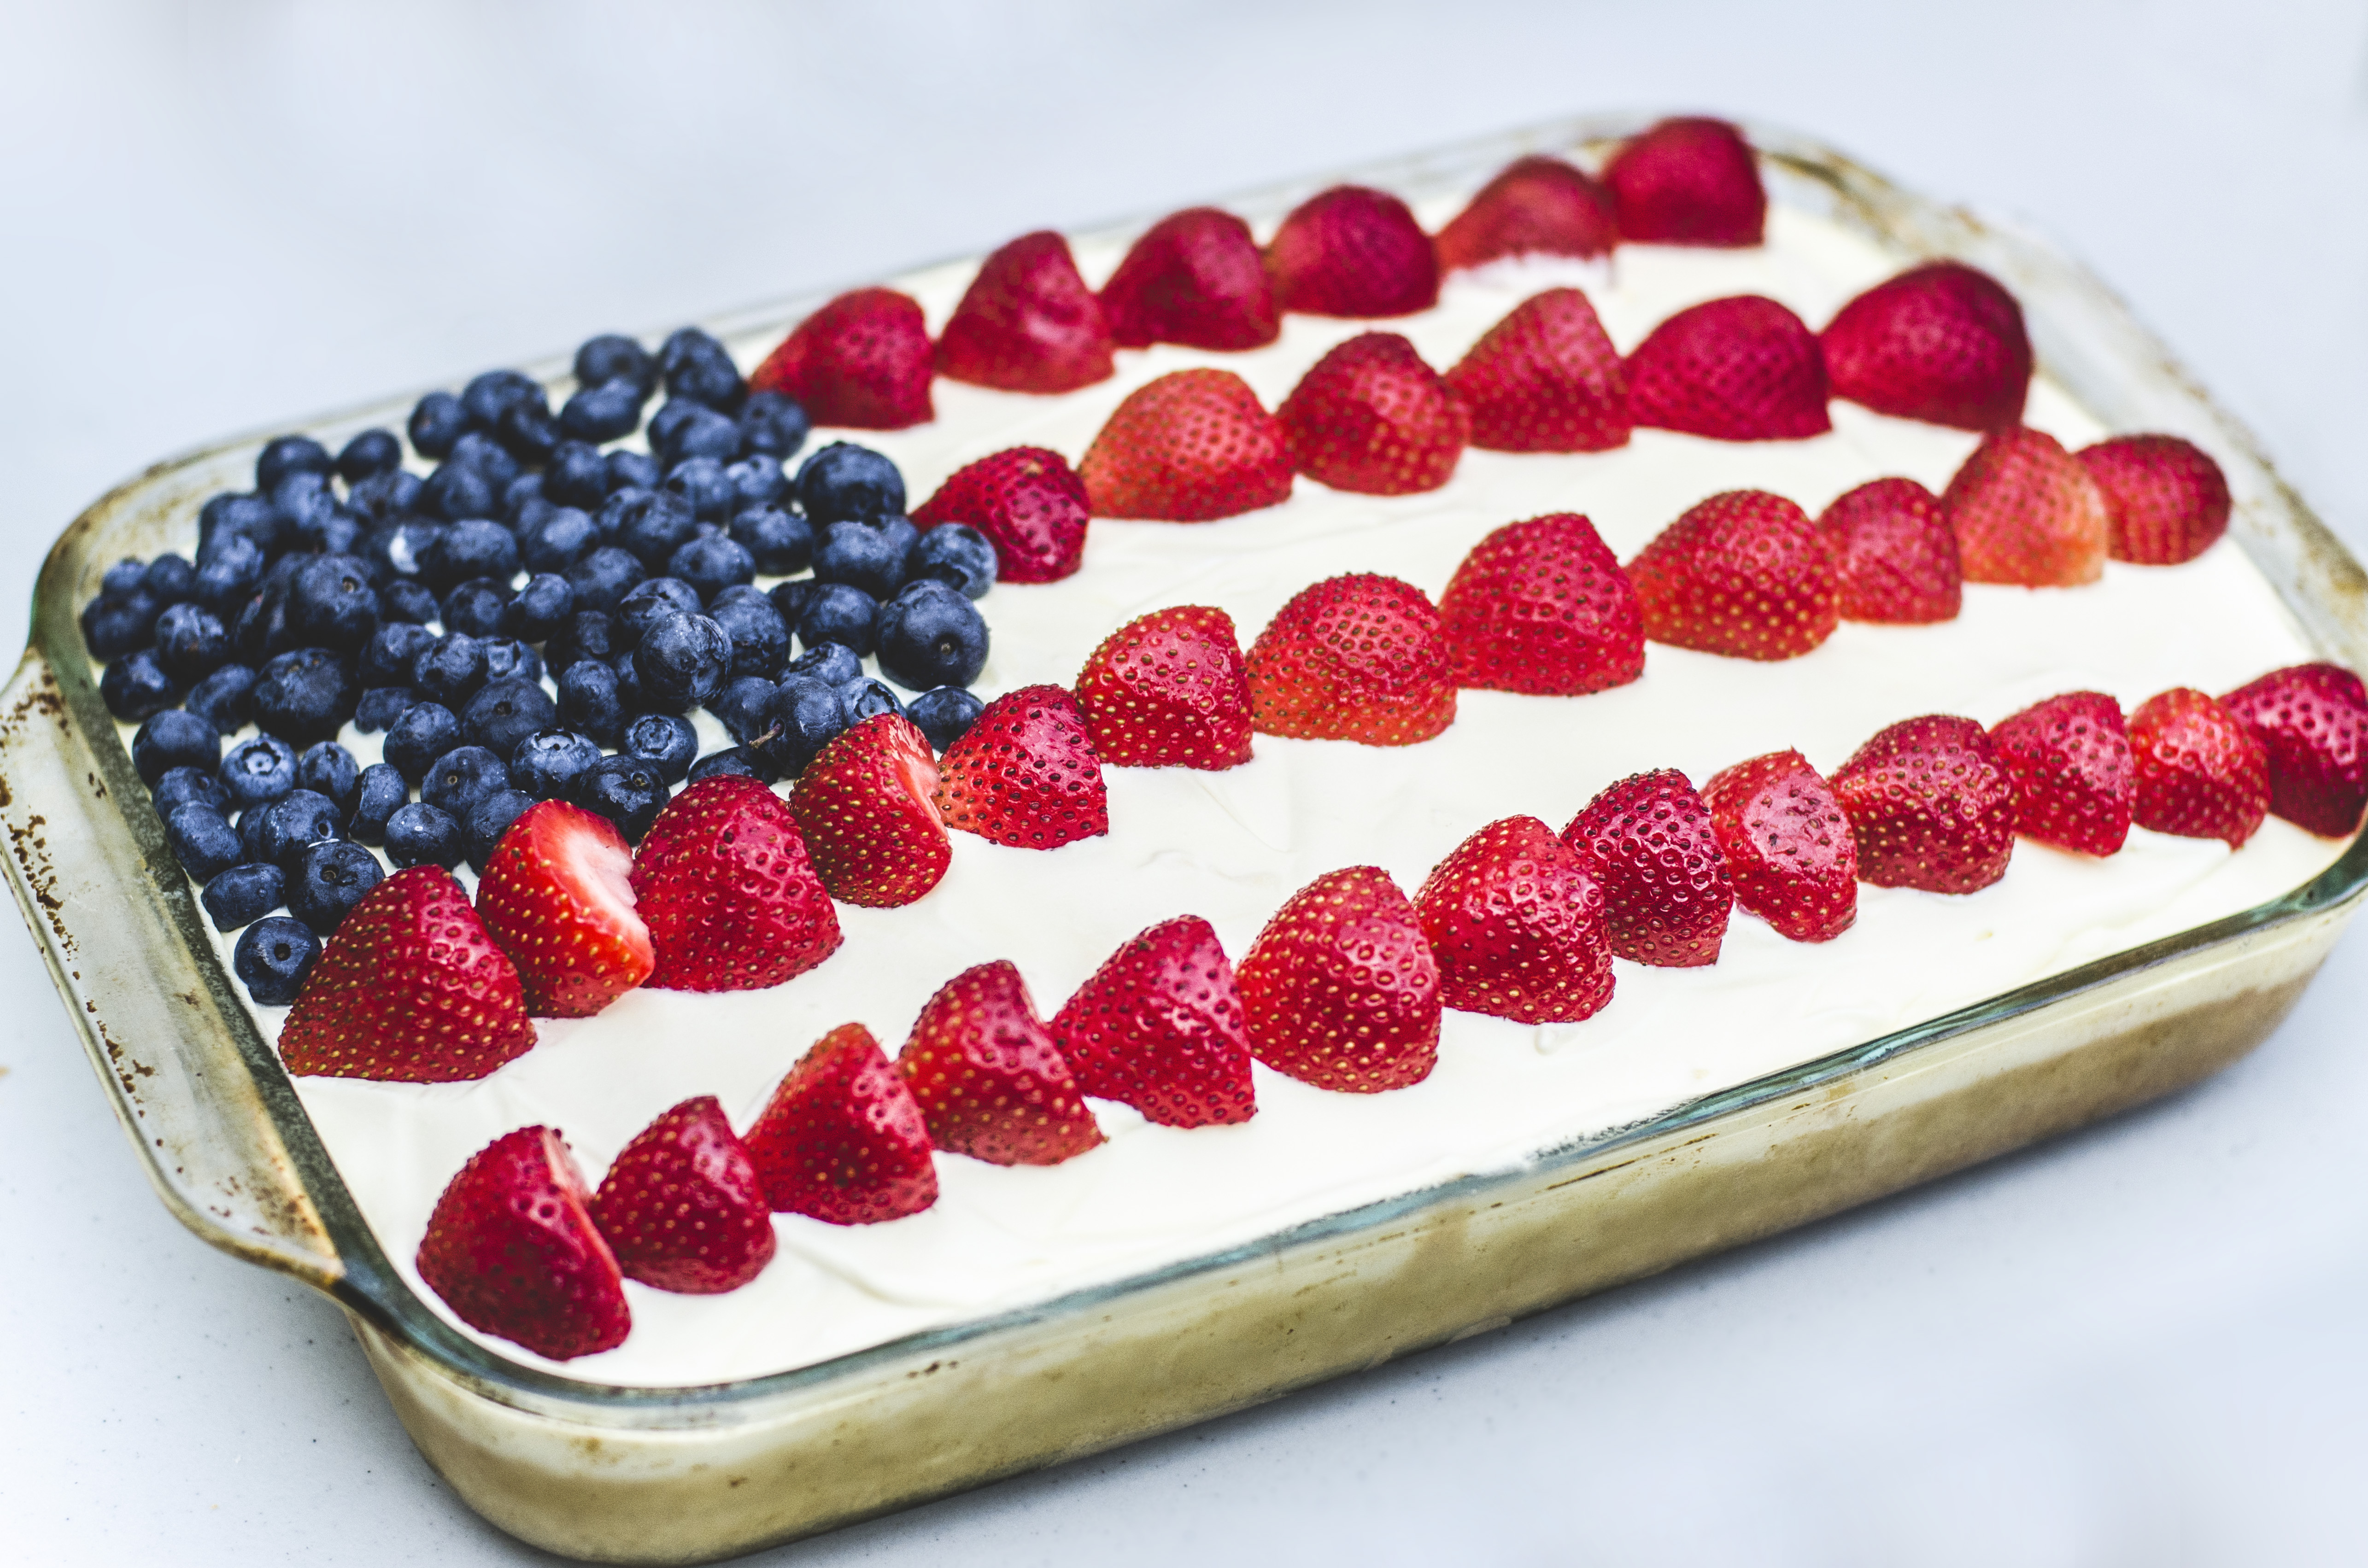 They decorated the pre-made sheet cake in the shape of an American Flag with fruit (Stock photo)